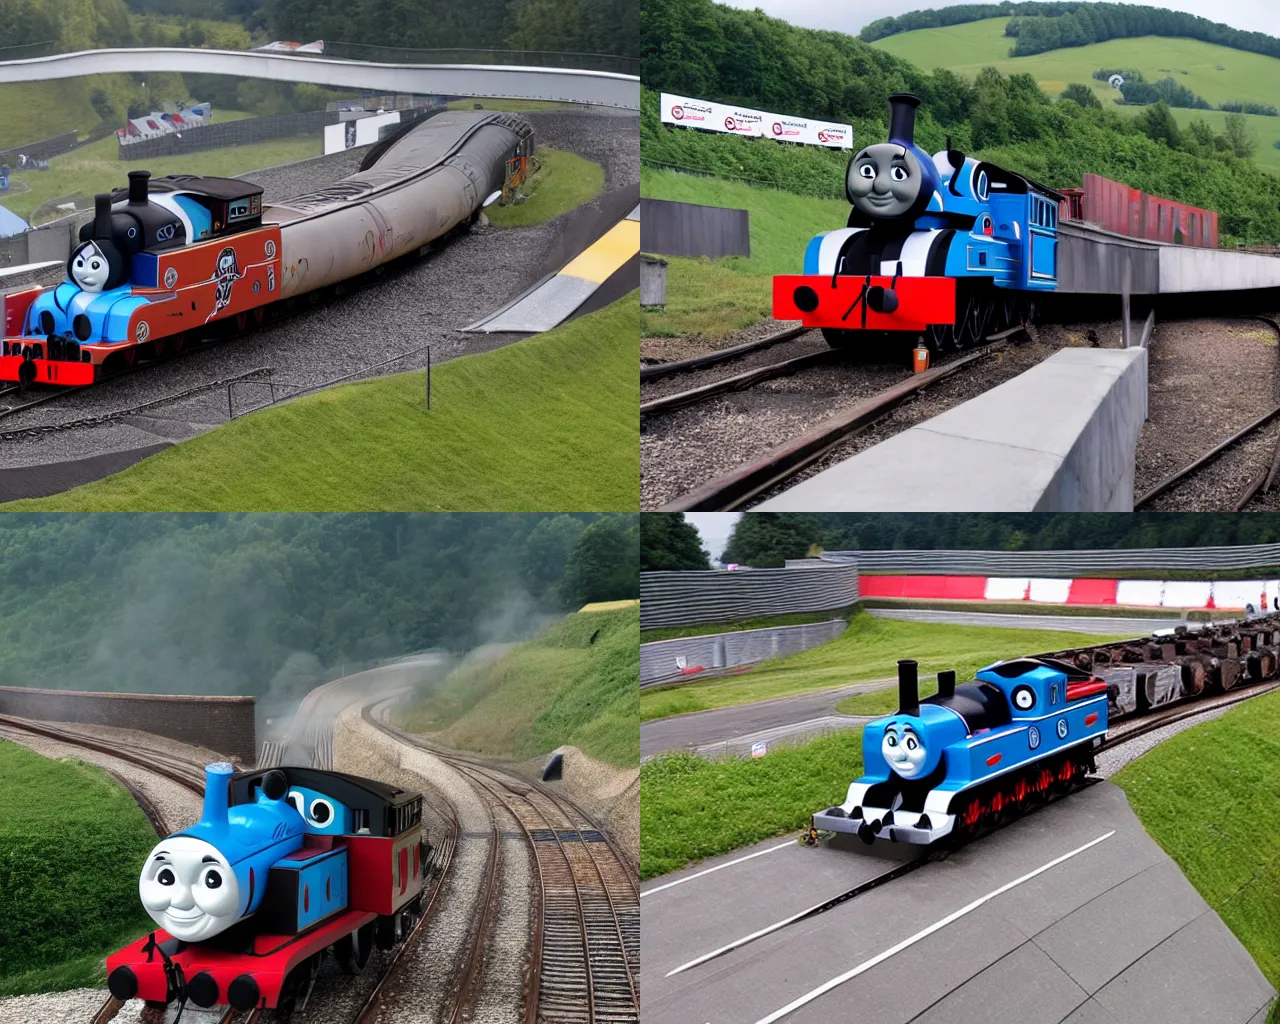 Prompt: Thomas the Tank Engine, as a sports car, at the Nurburgring Nordschleife setting a hot lap, not train tracks